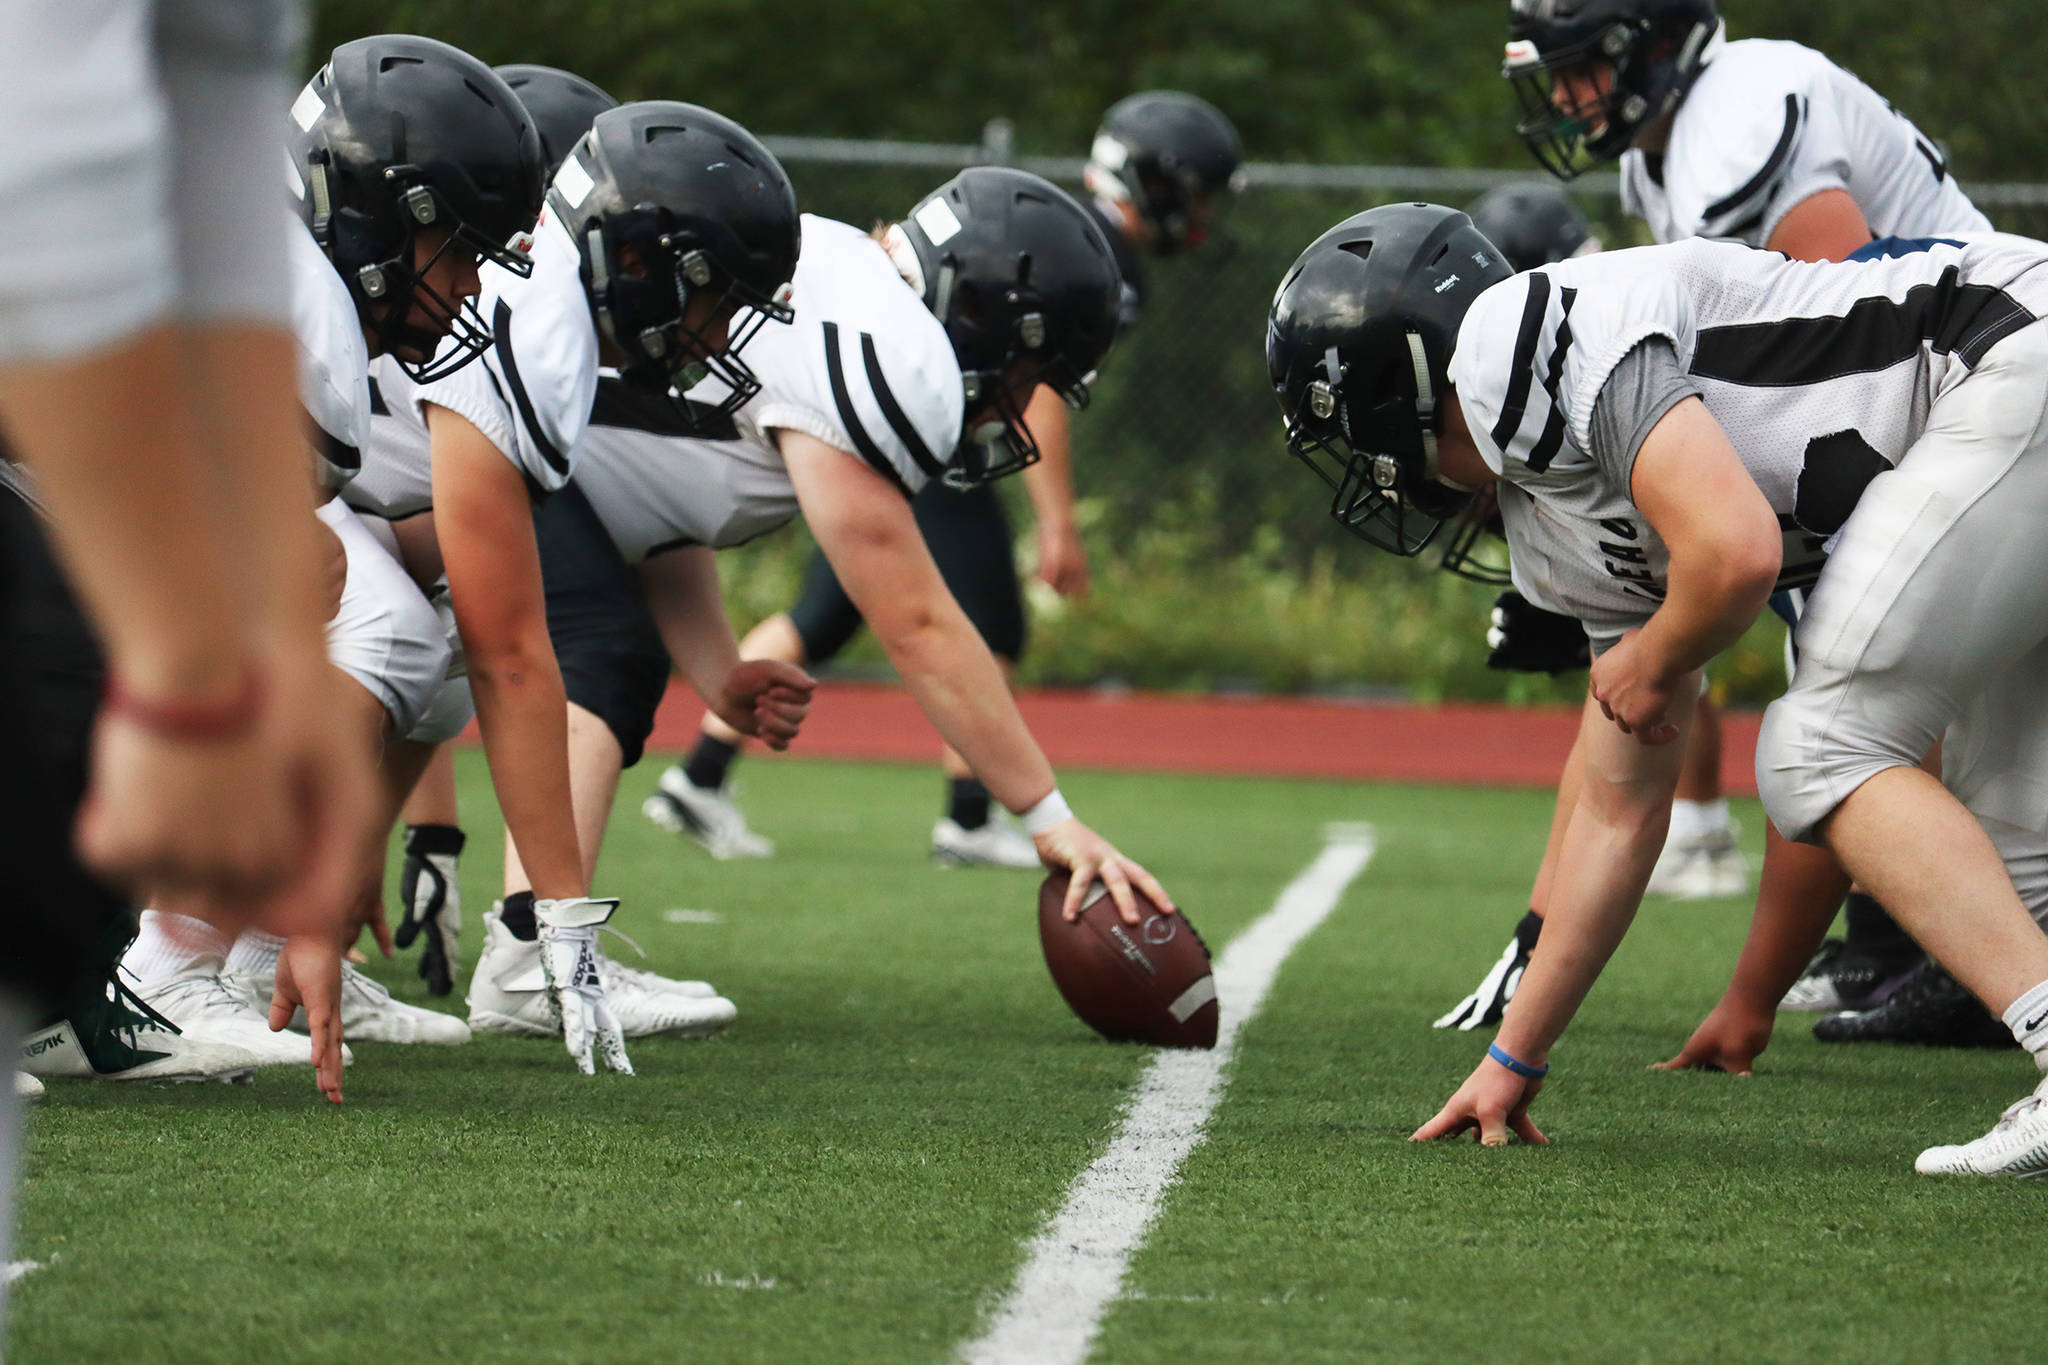 The Juneau Huskies practice on Aug. 10. The high school football team’s record stands at 2-1 following a loss to West Anchorage over the weekend. On Saturday, Juneau will host East Anchorage. (Ben Hohenstatt / Juneau Empire File)